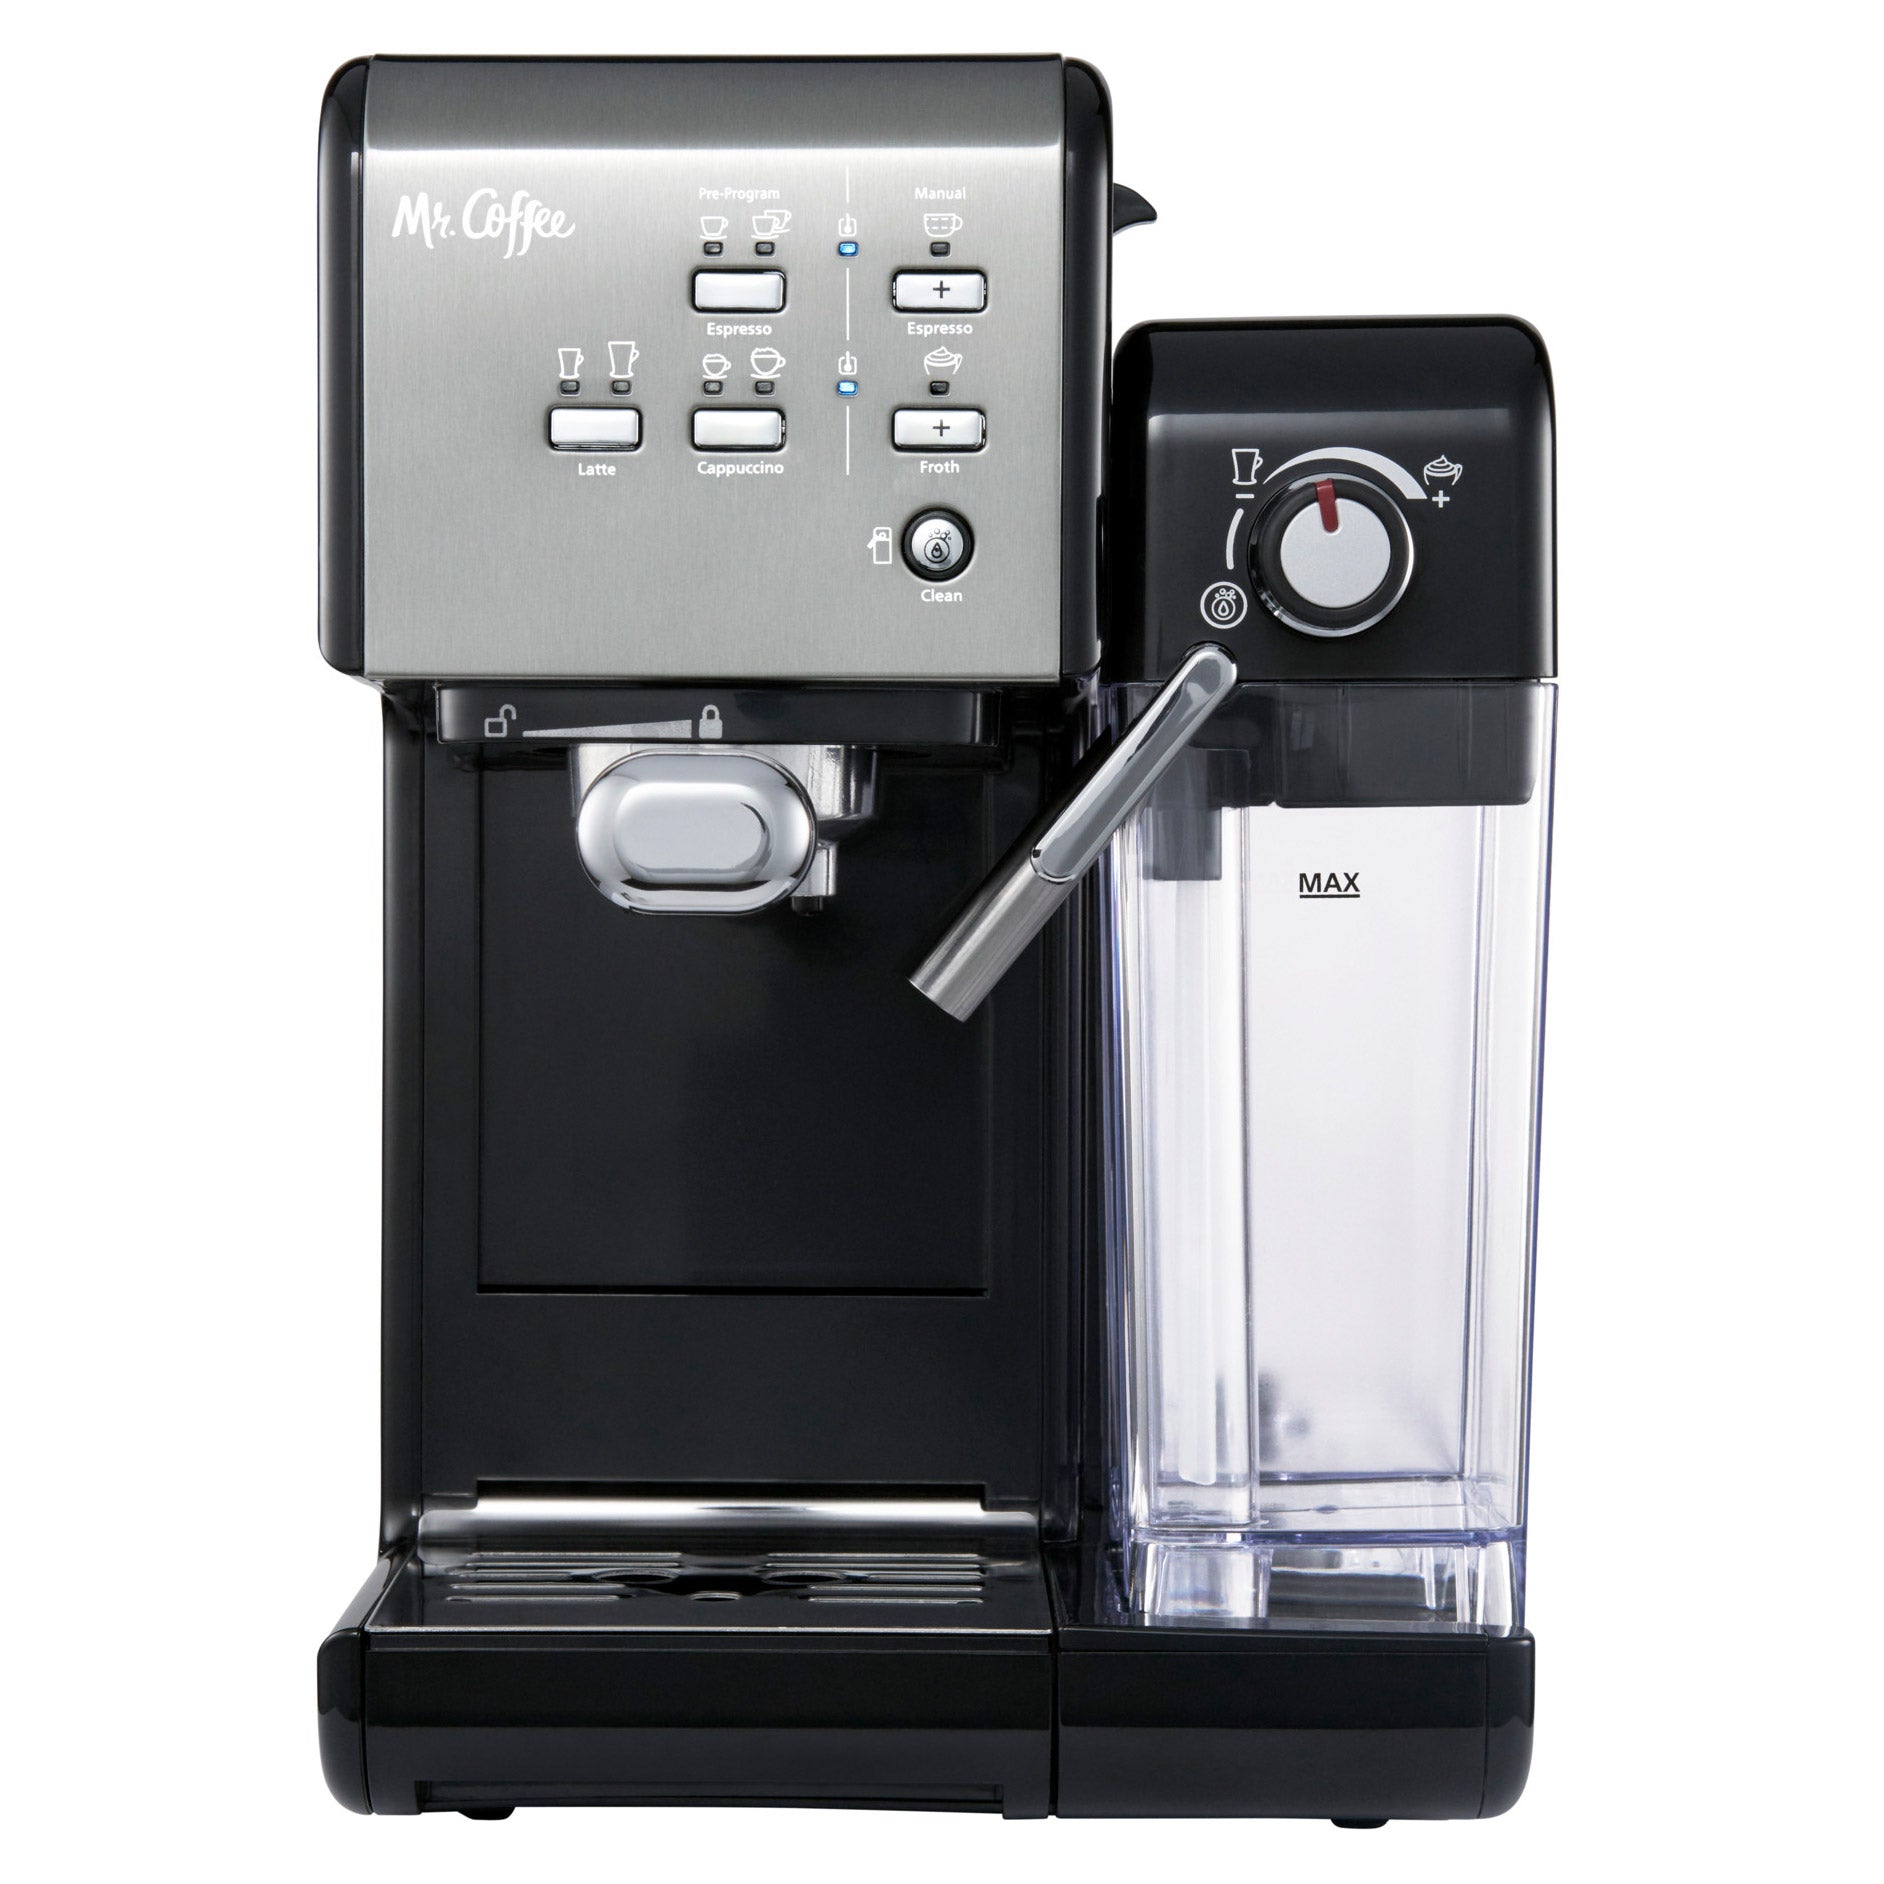 Mr. Coffee One-Touch CoffeeHouse Espresso and Cappuccino Machine, Dark Stainless Image